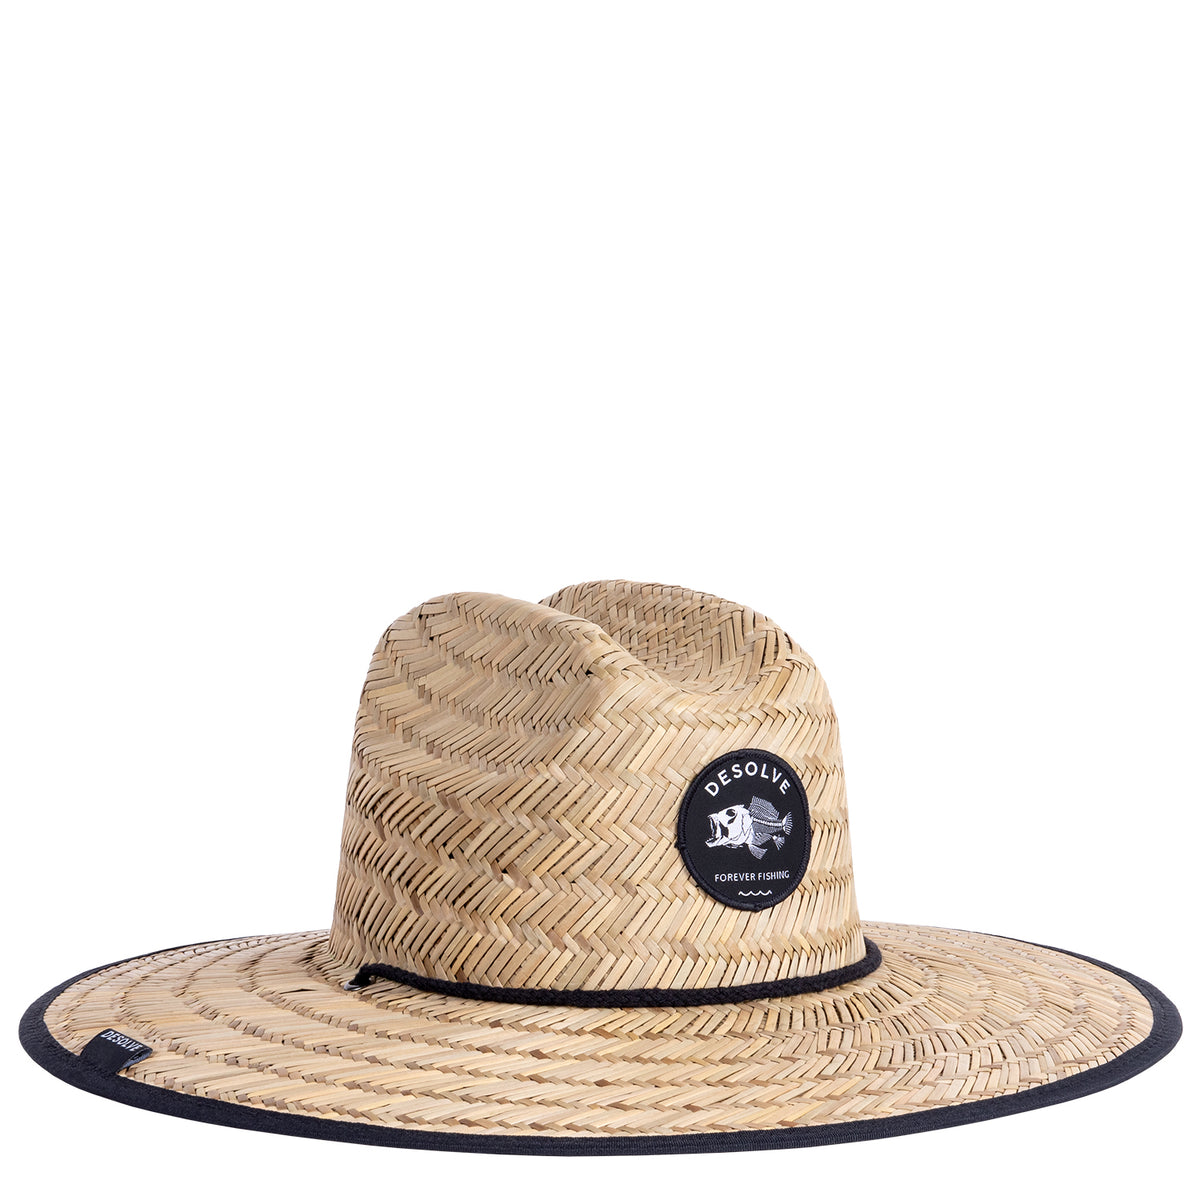 Desolve Supply Co, Snappy Straw Hat, 100% Rush Straw, One Size Fits Most, Brim Lining, Drawstring Fishing Hat, Mens - Desolve Supply Co.